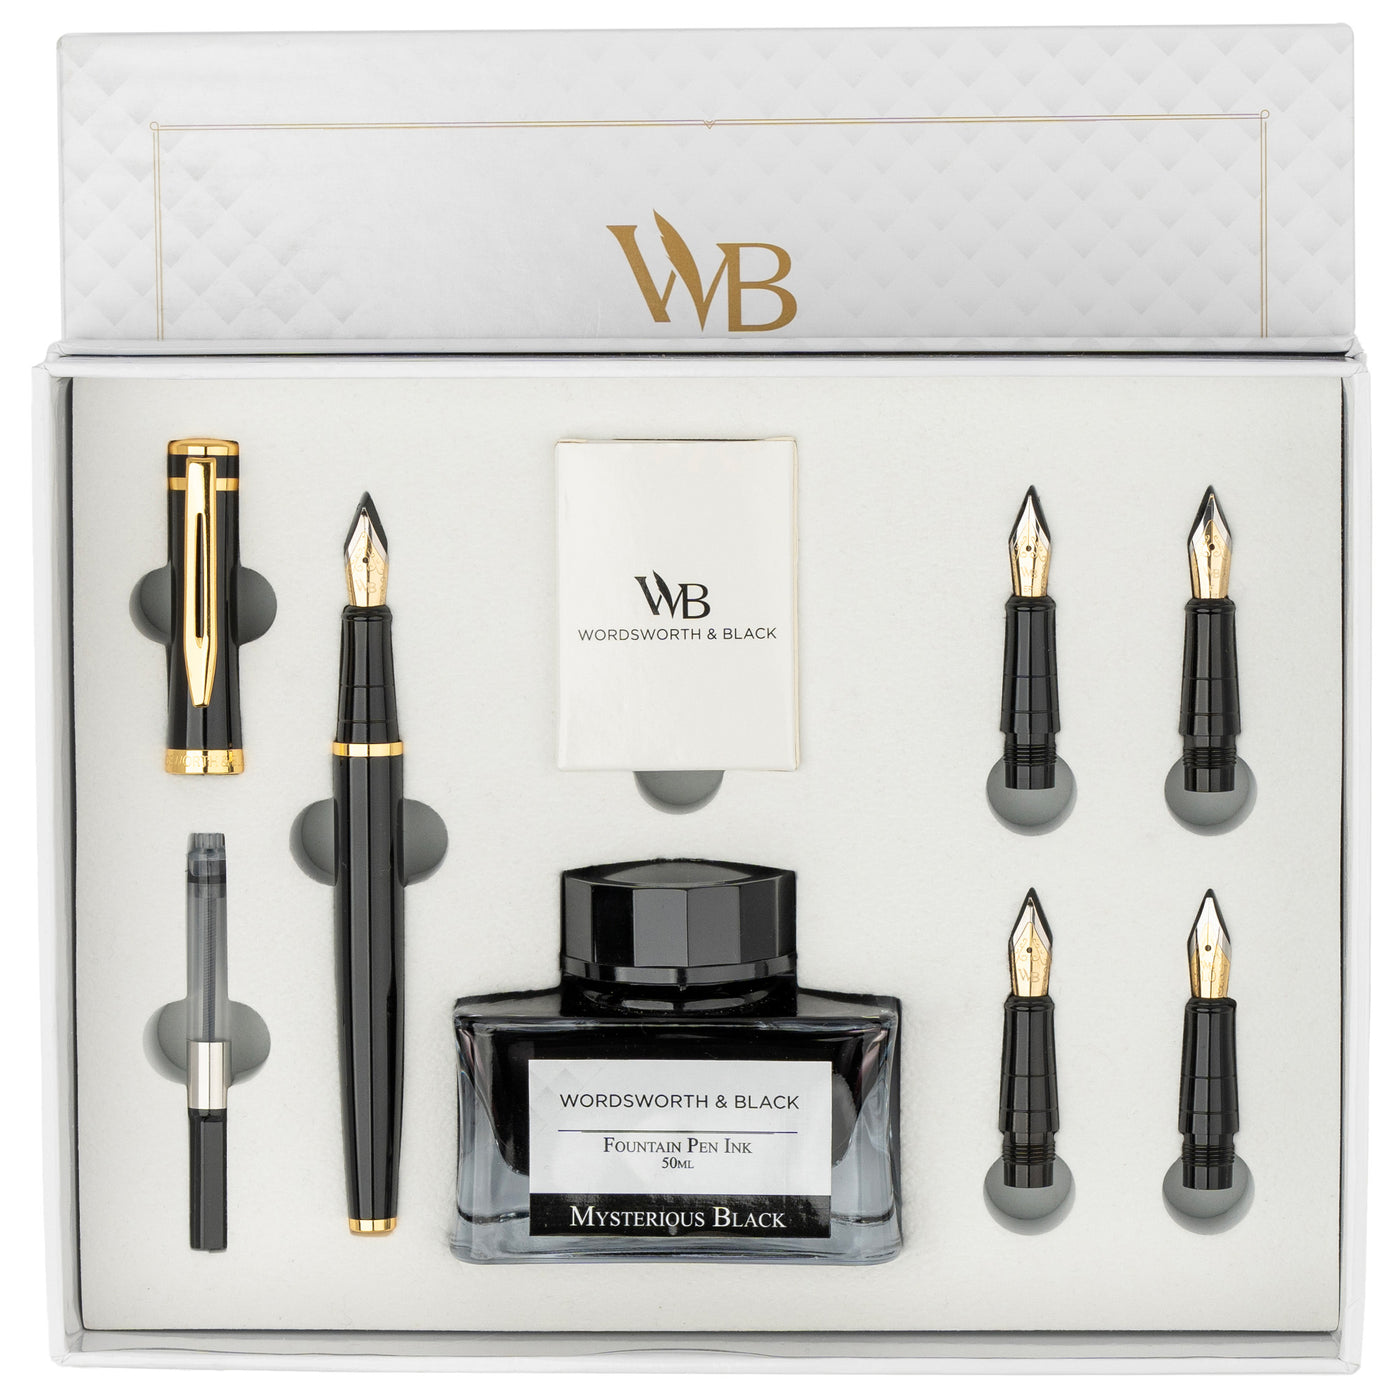 Wordsworth & Black Fountain Pen Gift Set, Includes Ink Bottle, 6 Ink Cartridges, Ink Refill Converter, 4 Replacement Nibs, Premium Package, Journaling, Calligraphy, Smooth Writing Pens